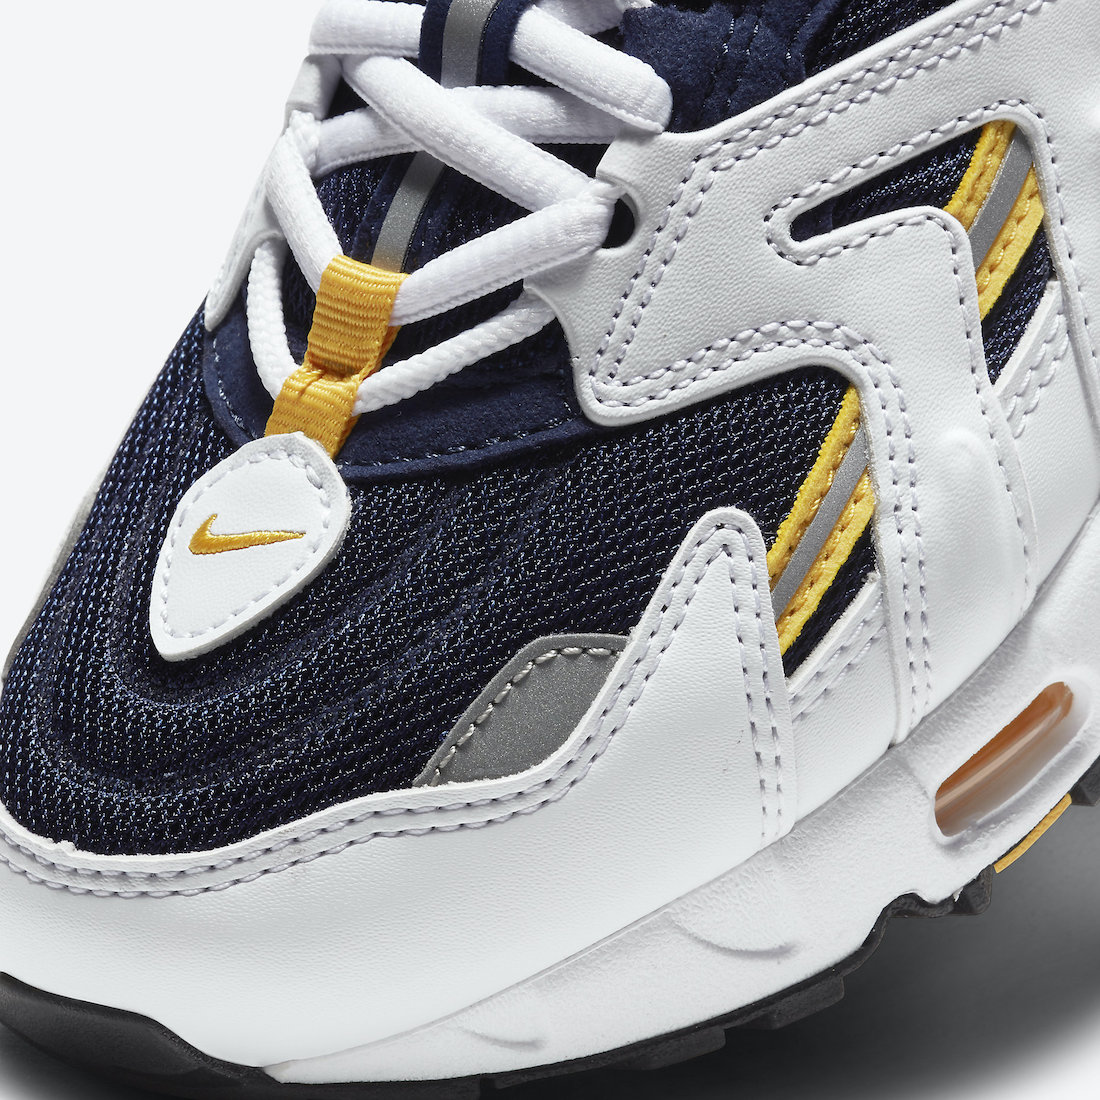 Nike Air Max 96 II Midnight Navy CZ1921-100 Release Date